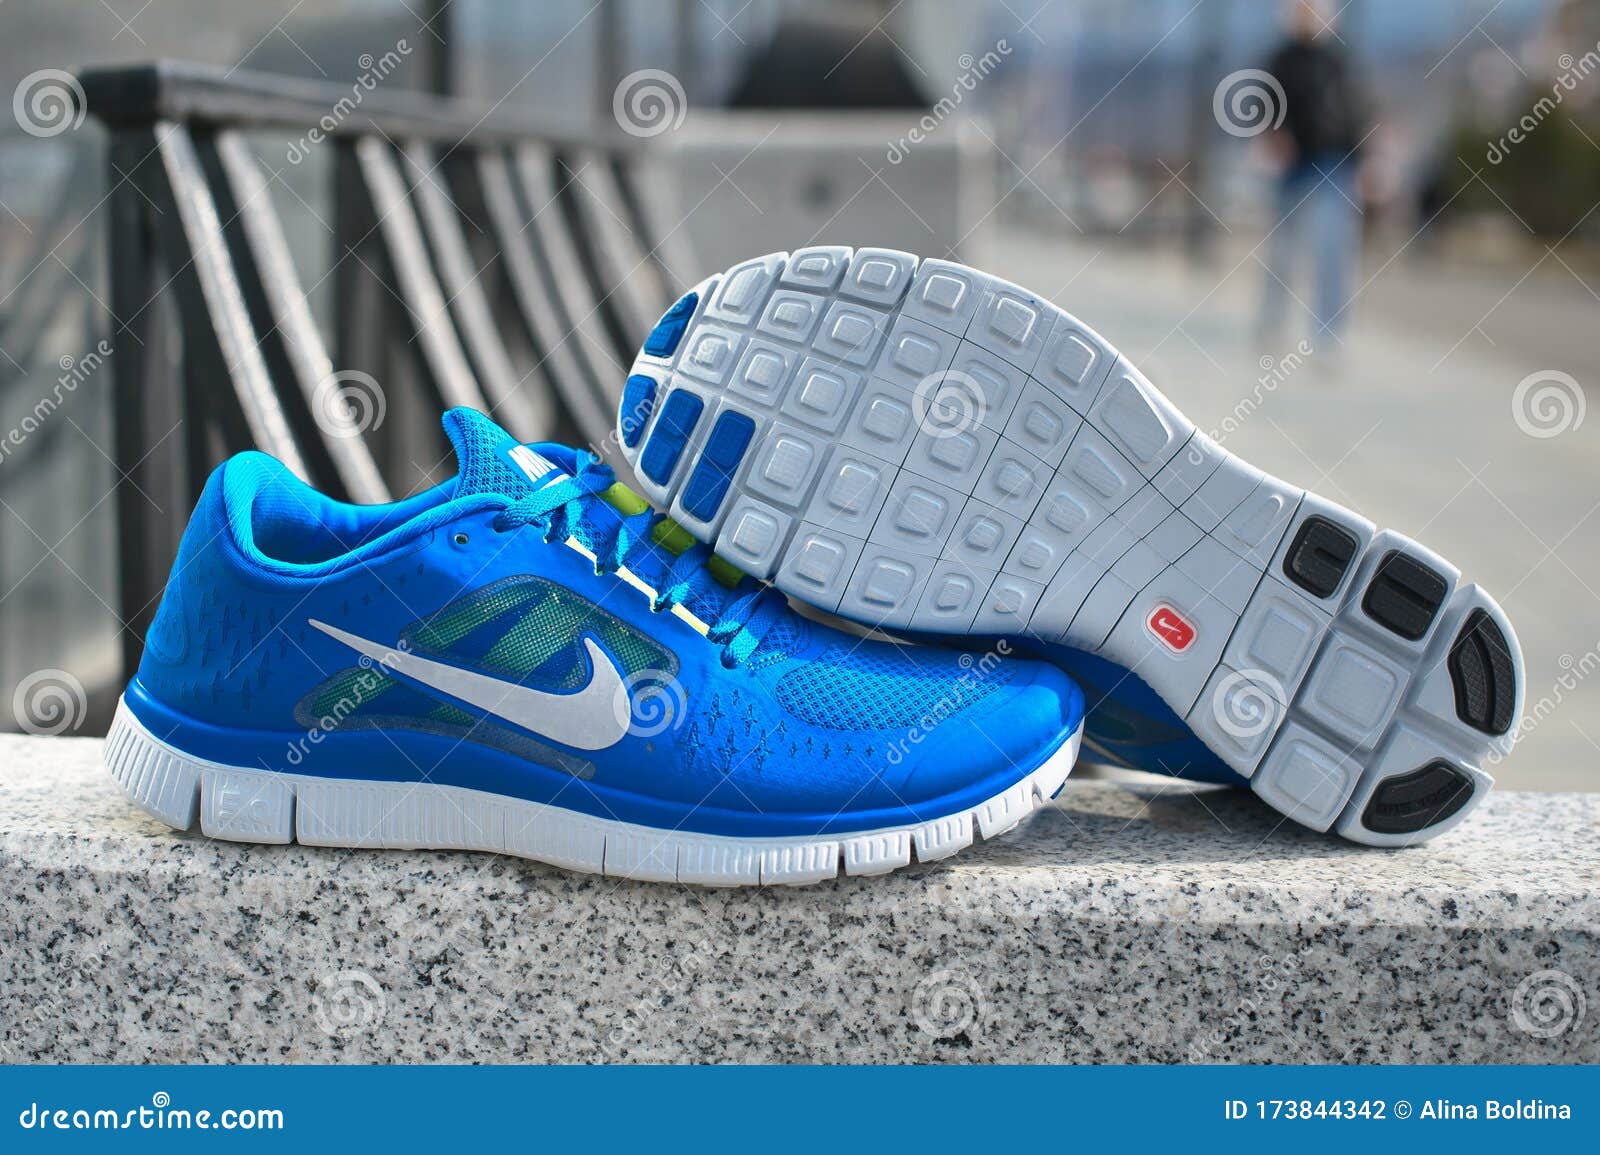 Blue Nike Free 5.0 Running Shoes on Grey Urban Background. Krasnoyarsk, Russia - April 16, 2015 Editorial Photography - Image of footwear, product: 173844342